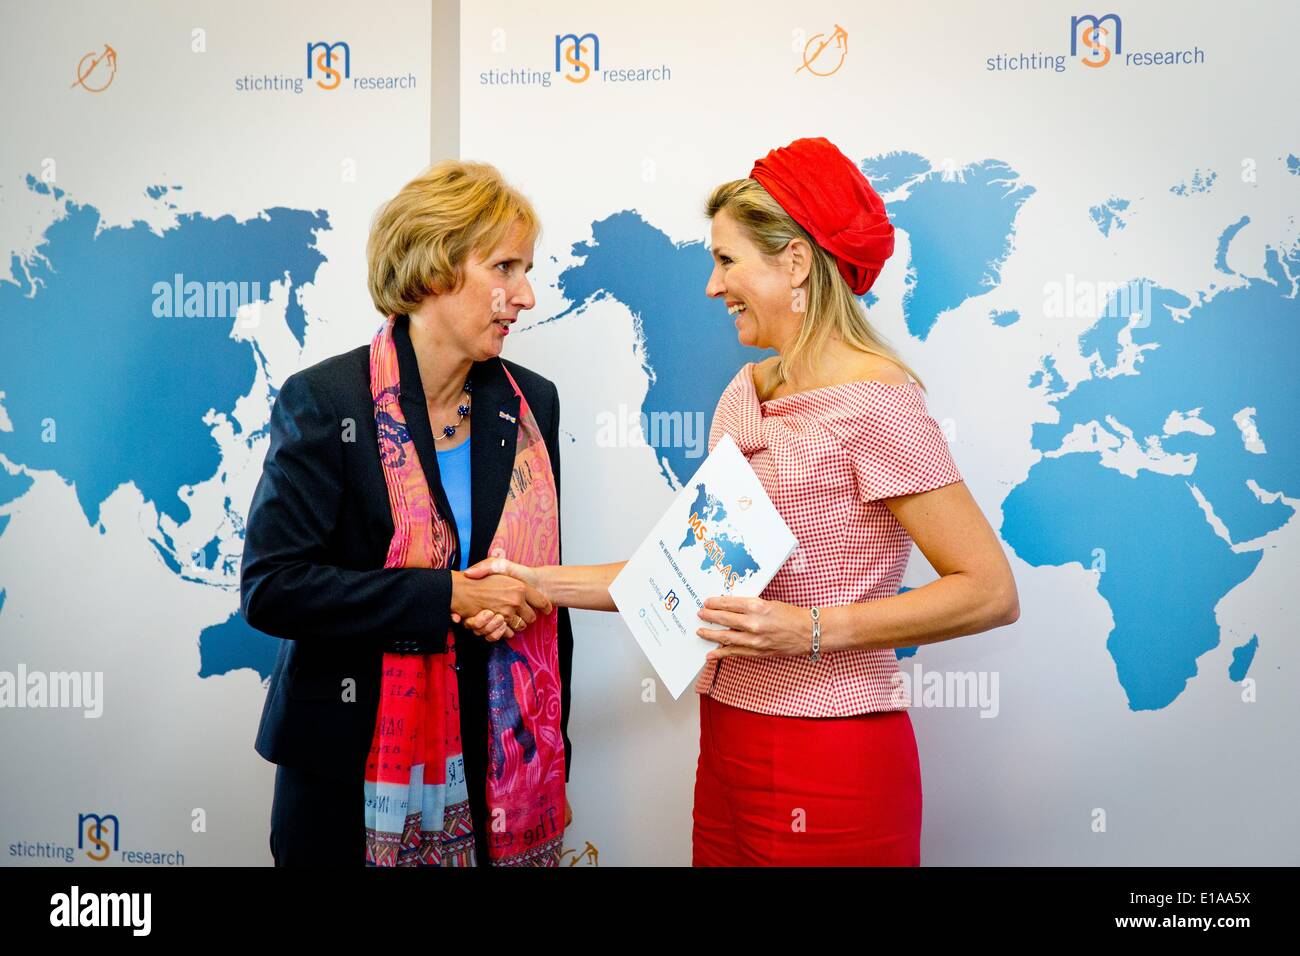 Voorschoten, The Netherlands. 28th May, 2014. Queen Maxima (R) visits foundation MS Research at World MS Day in Voorschoten, The Netherlands, 28 May 2014. The Queen received the first Dutch version of the International MS (multiple sclerosis) Atlas. Photo: Patrick van Katwijk/NO WIRE SERVICE/dpa/Alamy Live News Stock Photo